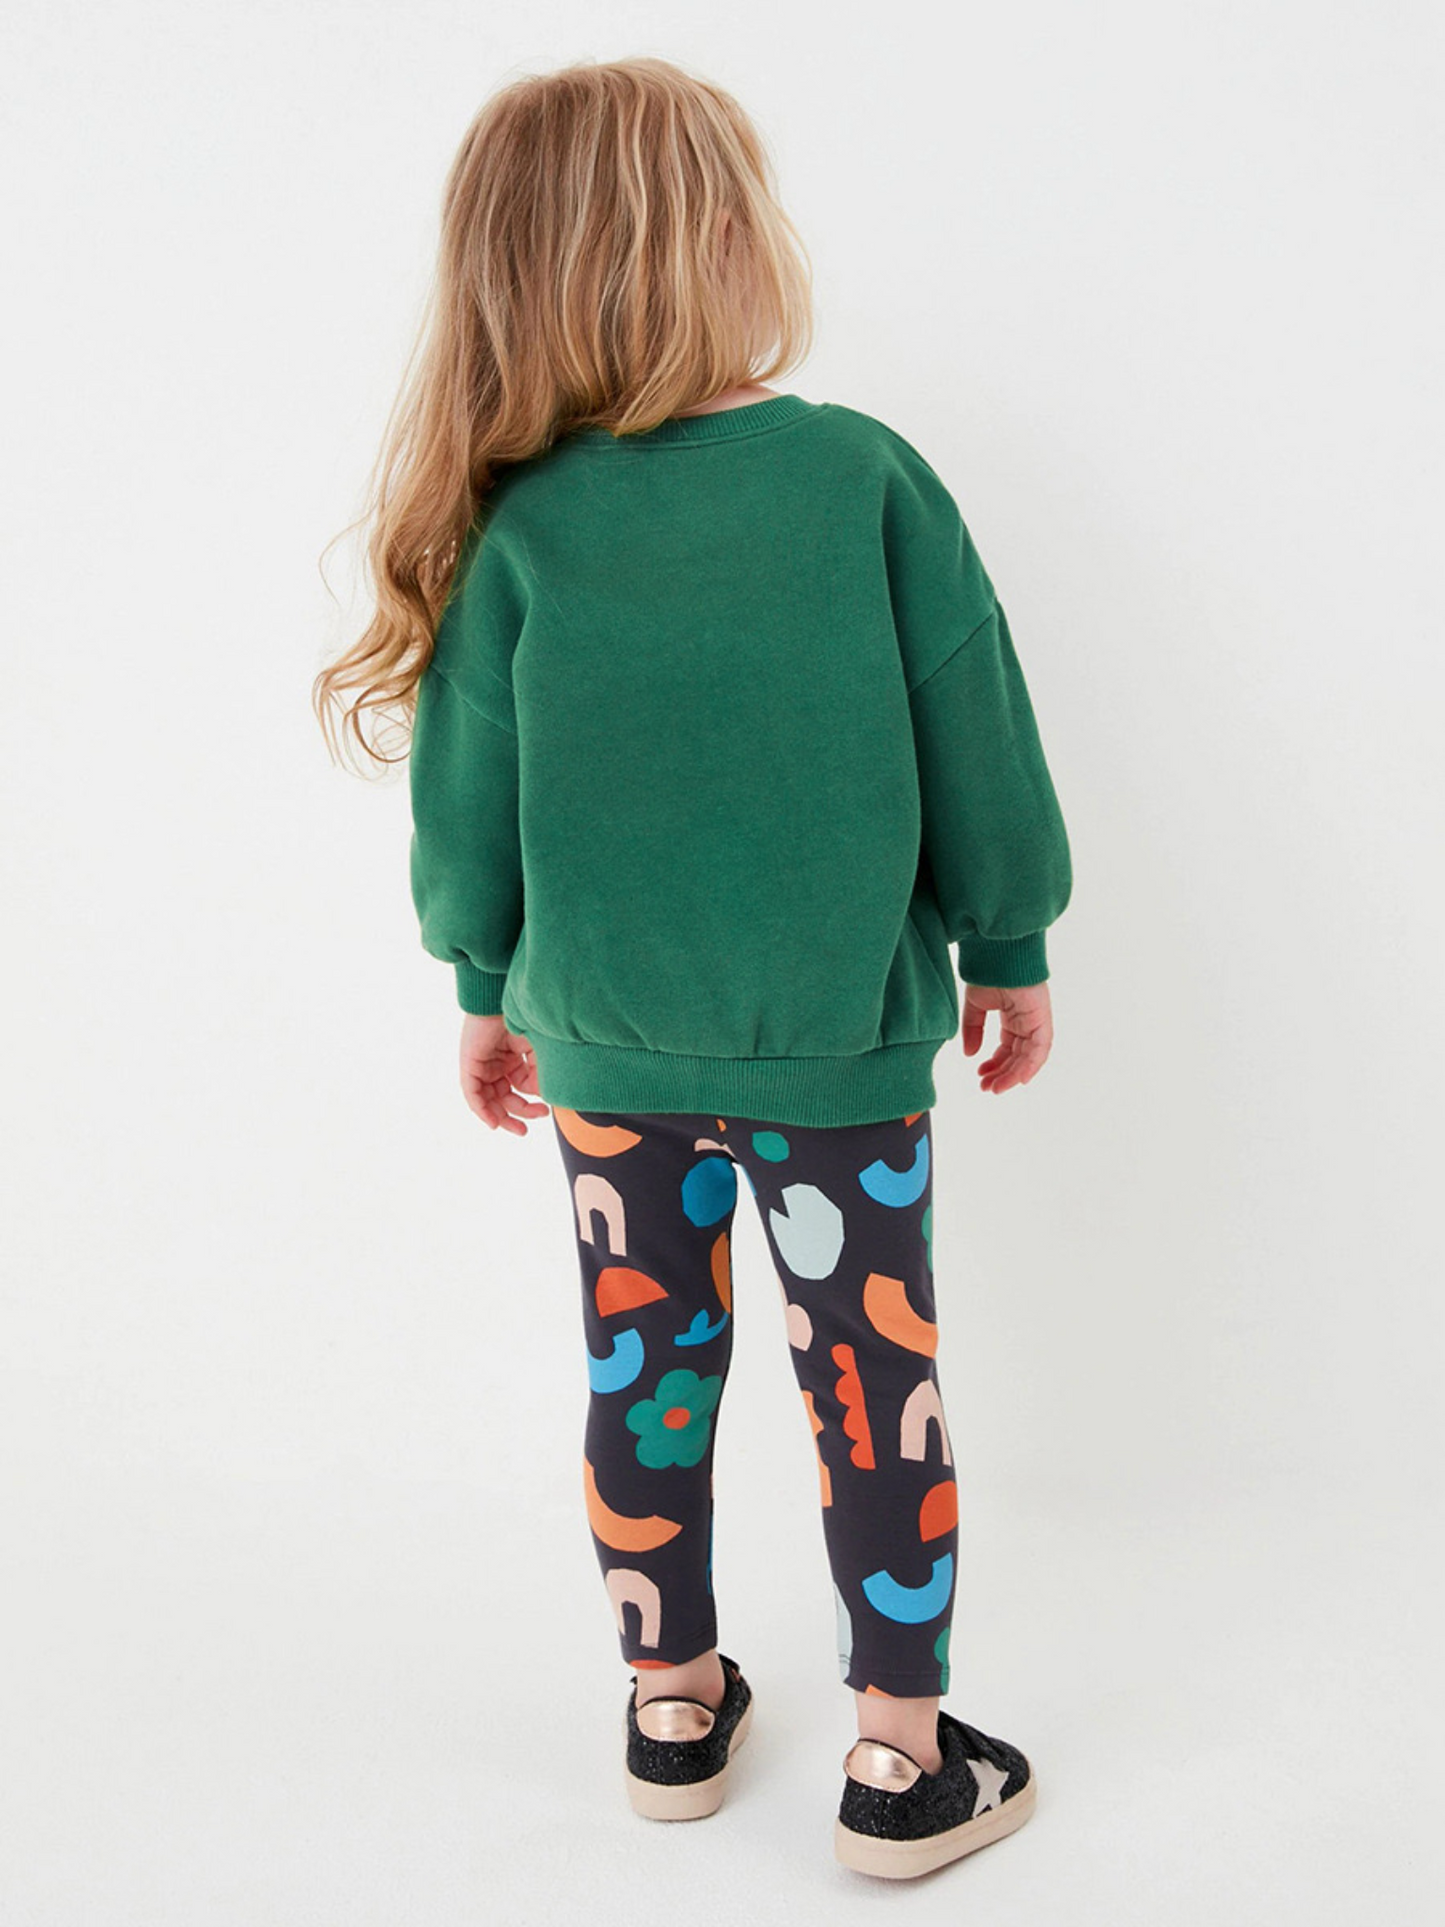 Daisy fleece pullover and Abstract floral Legging